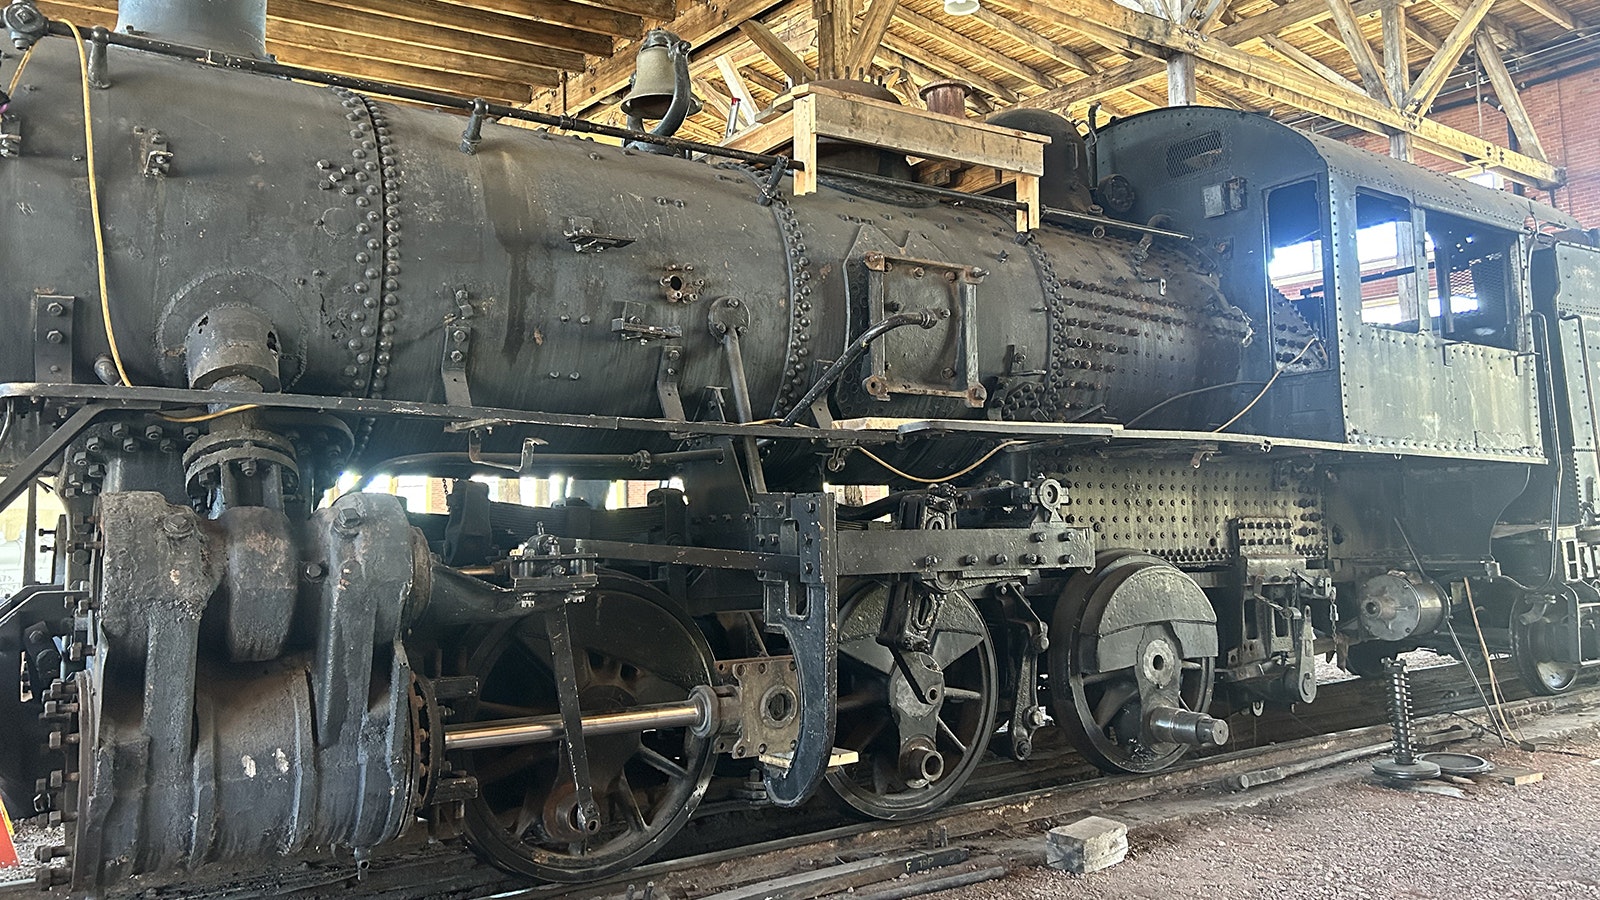 Engine 4420 is a steam locomotive built in Ohio in 1915 and retired from a Utah rail yard in 1957 The locomotive is about halfway through a four year restoration process.